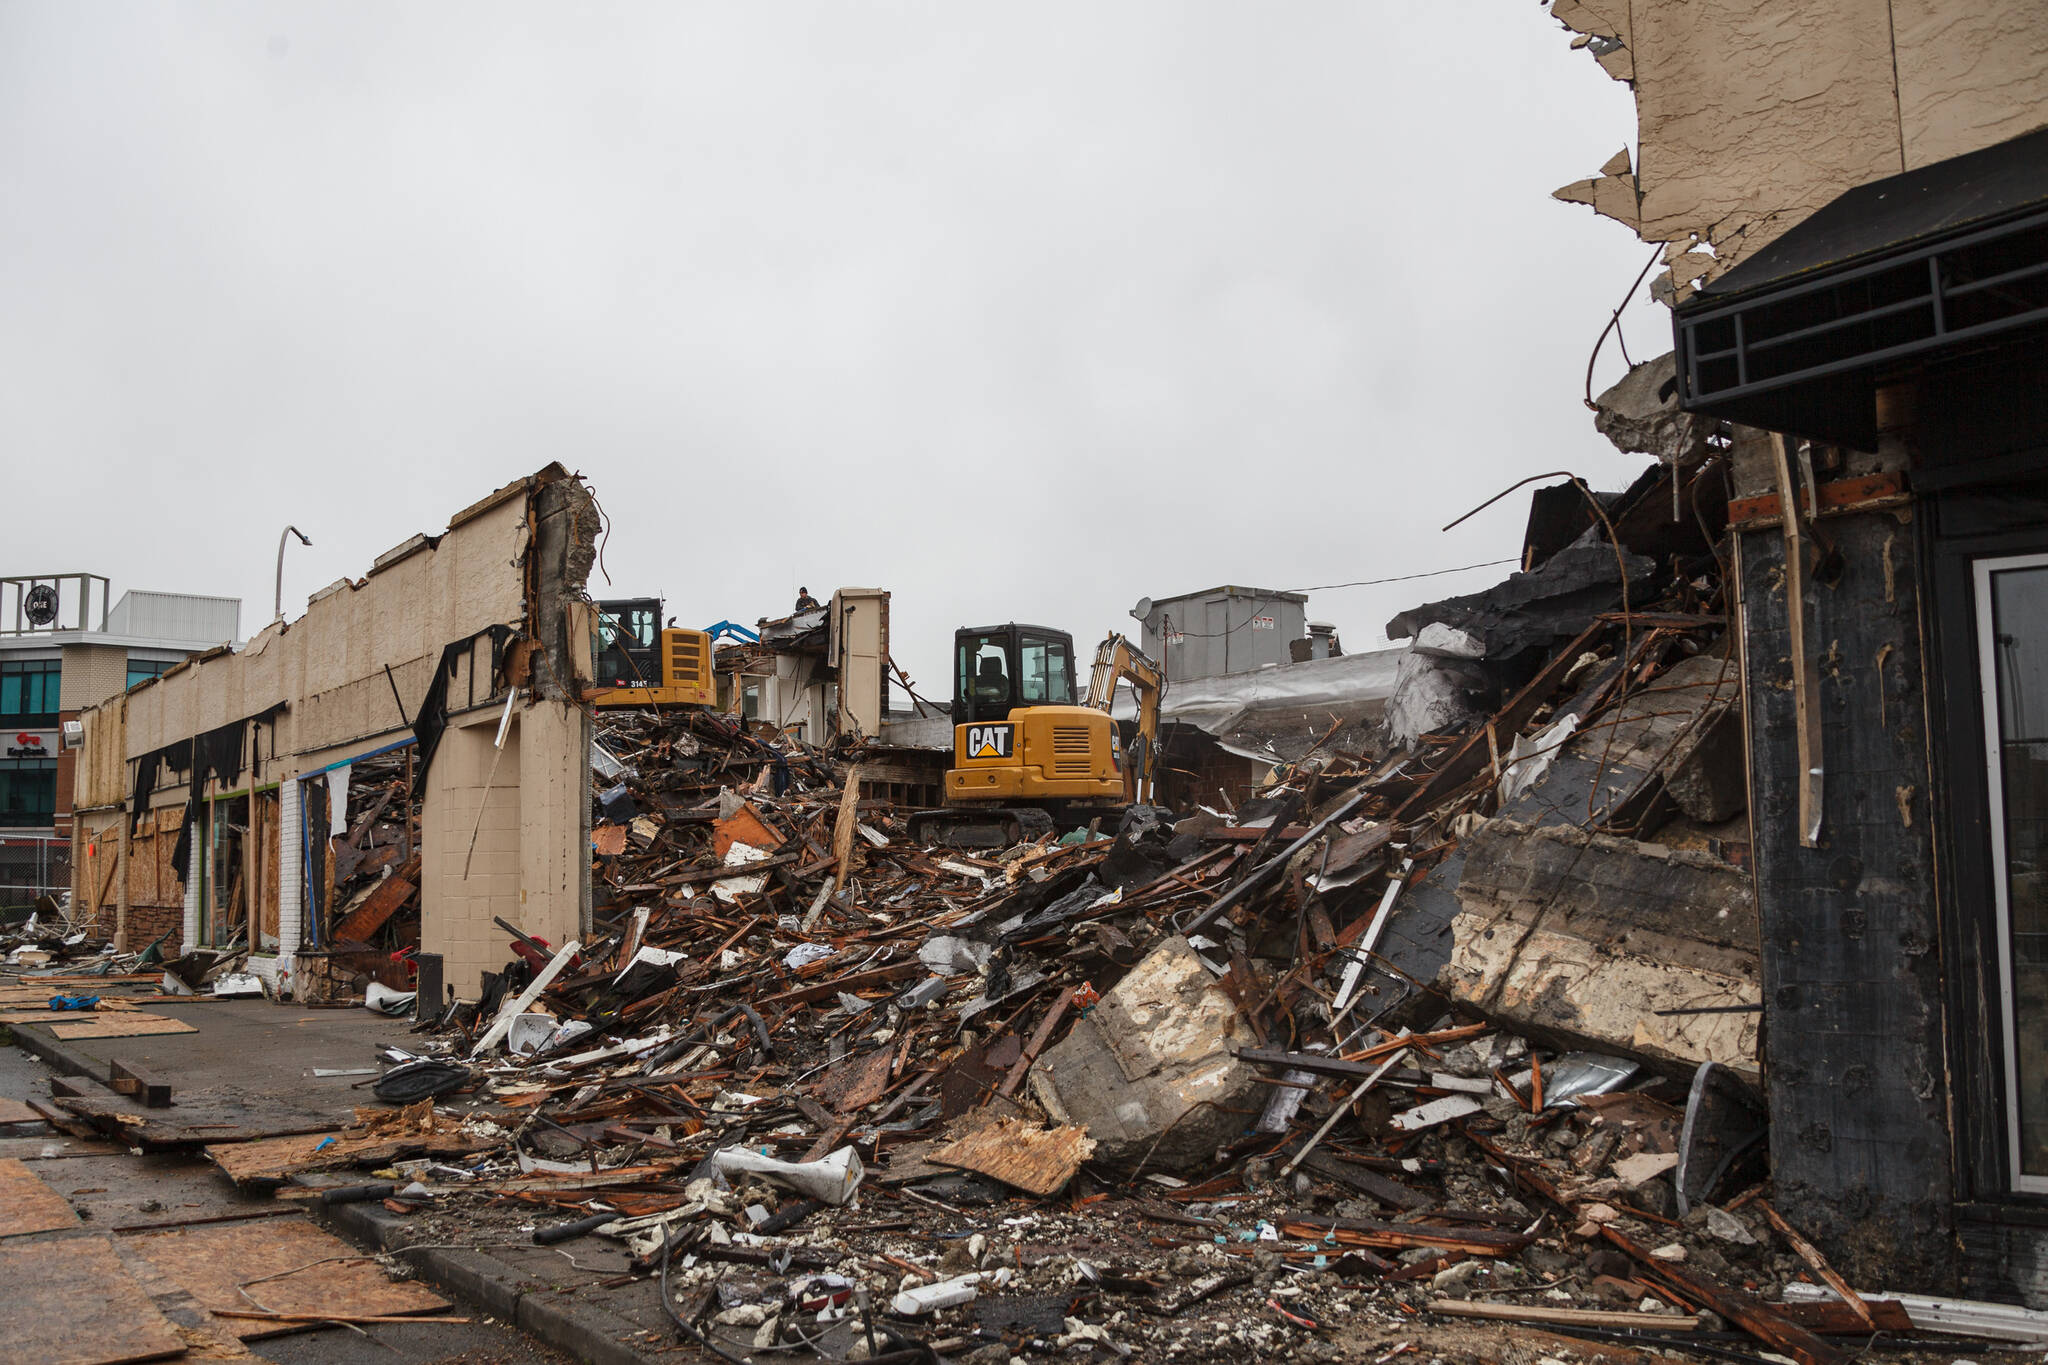 Excavators demolish the Max House Apartments complex in downtown Auburn on Wednesday, Dec. 15. File photo